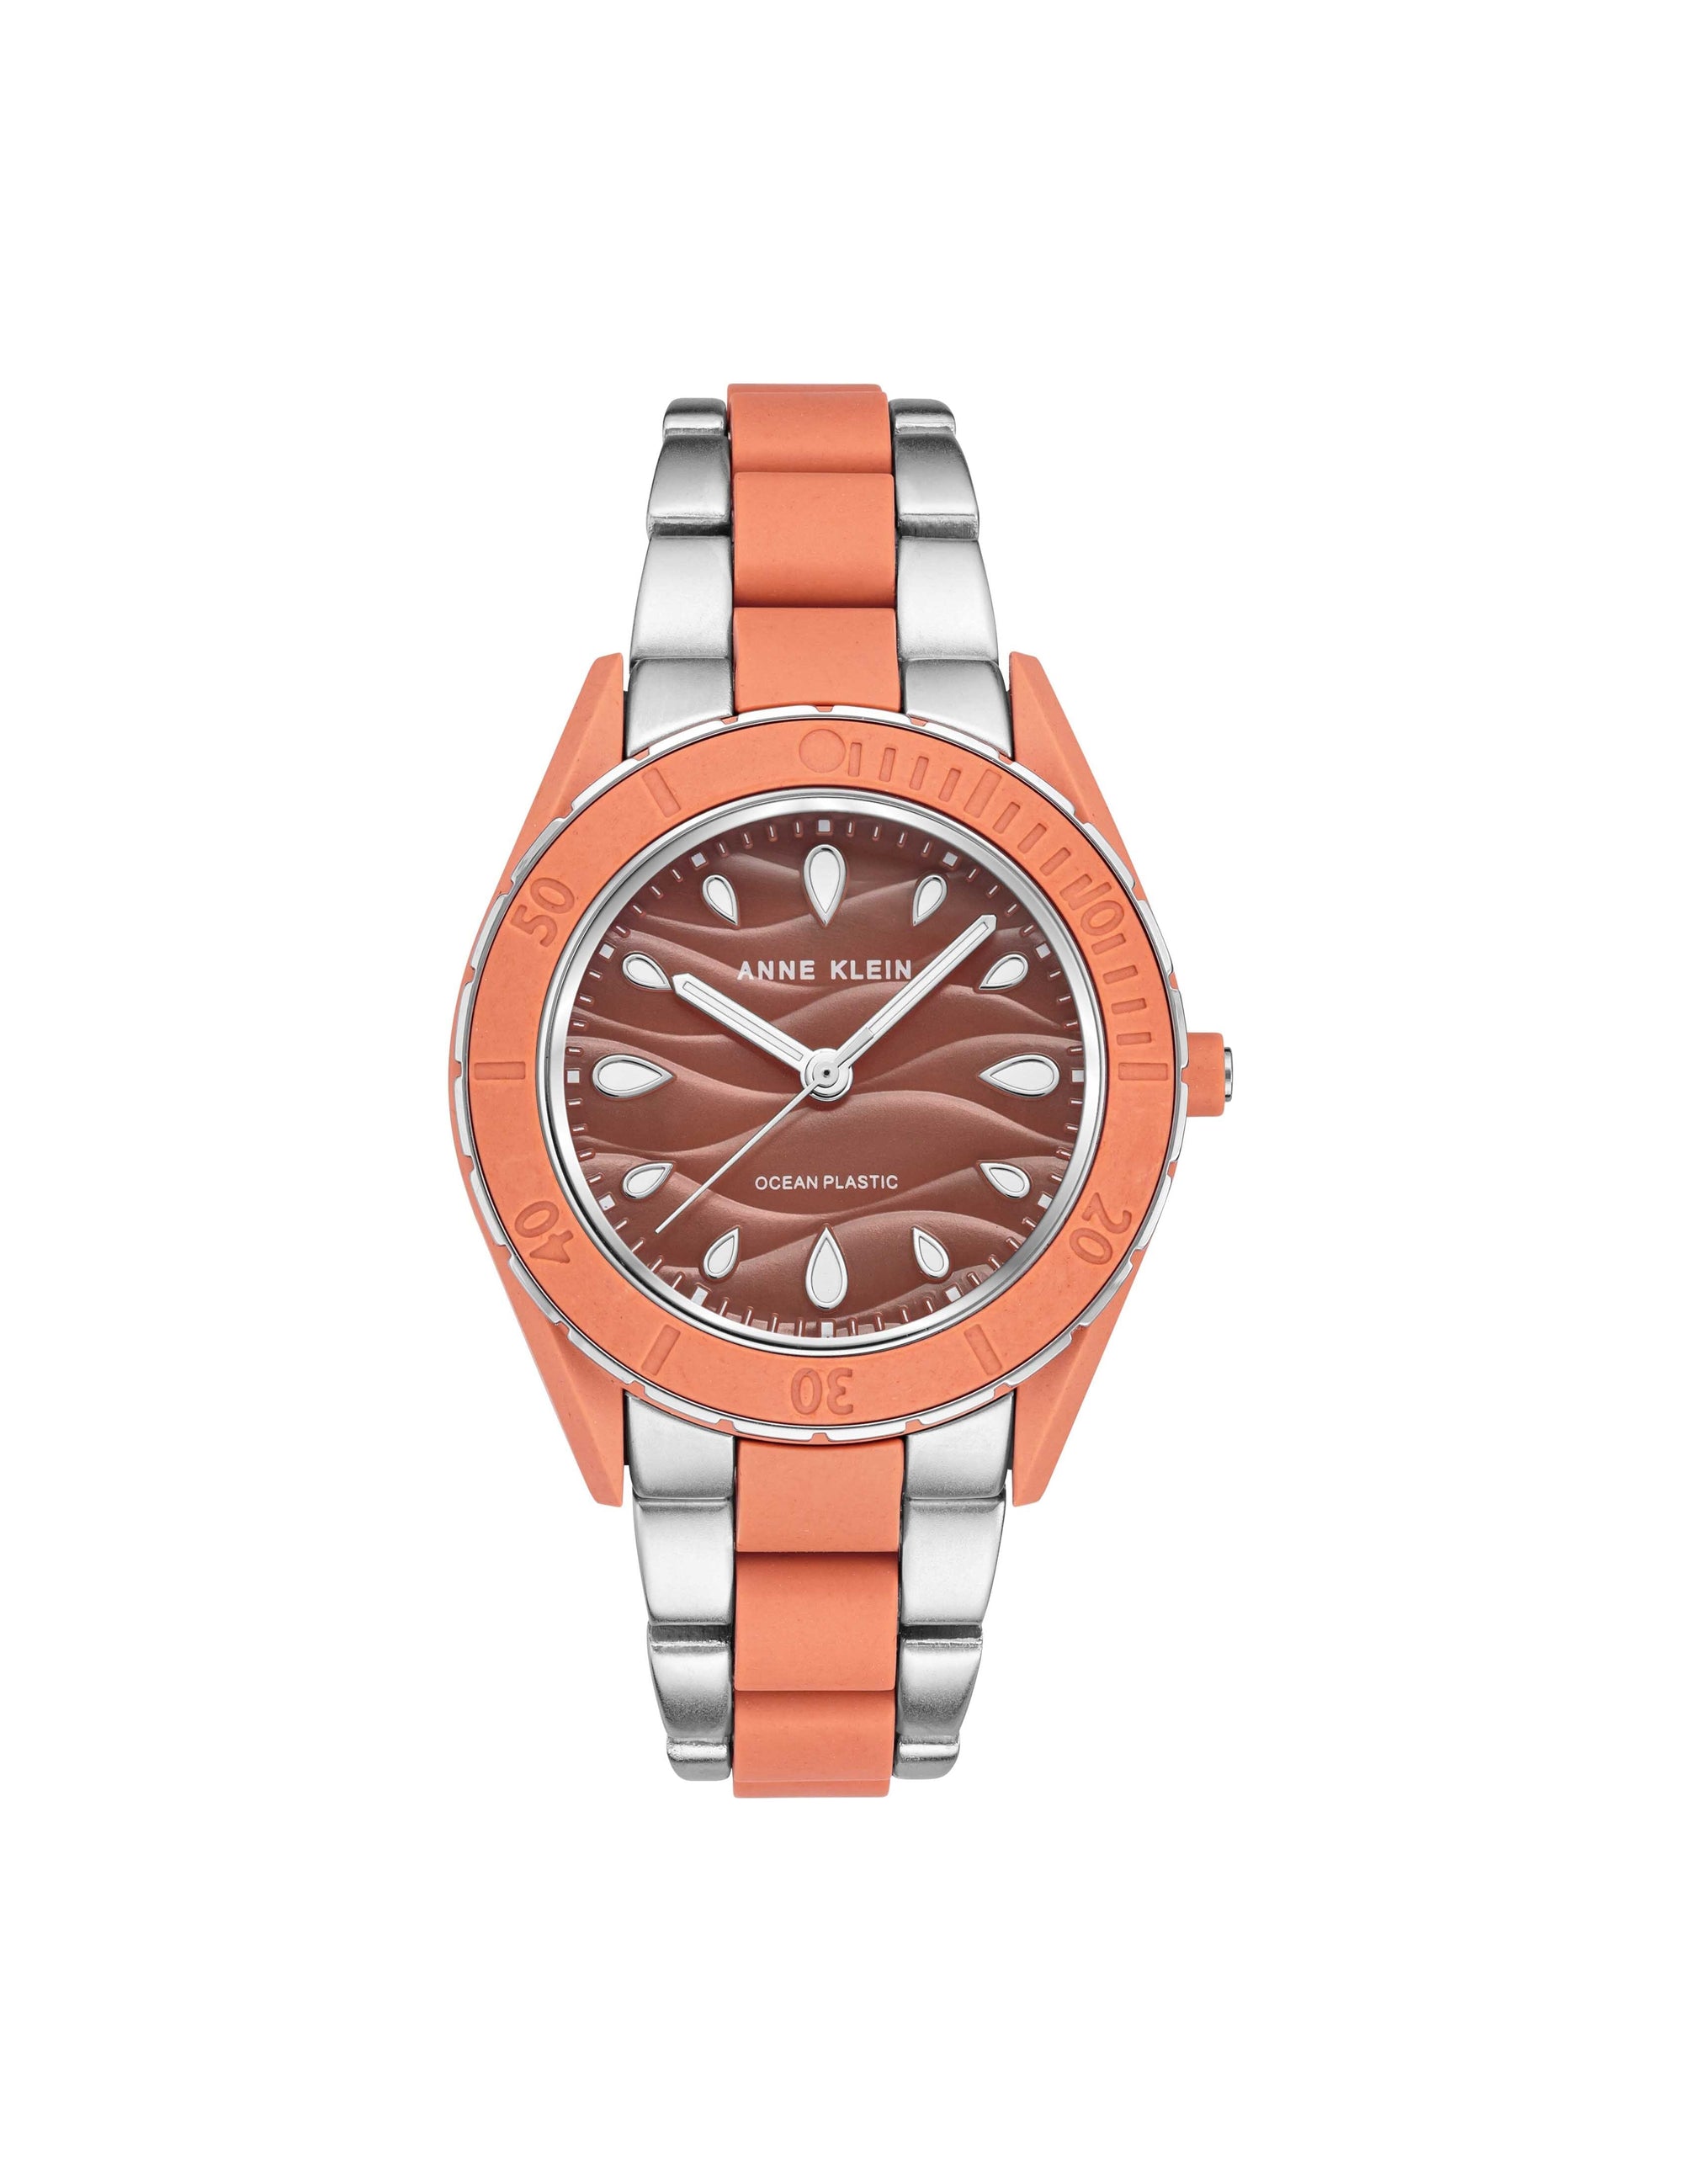 About/CoralWatch | Coral Watch